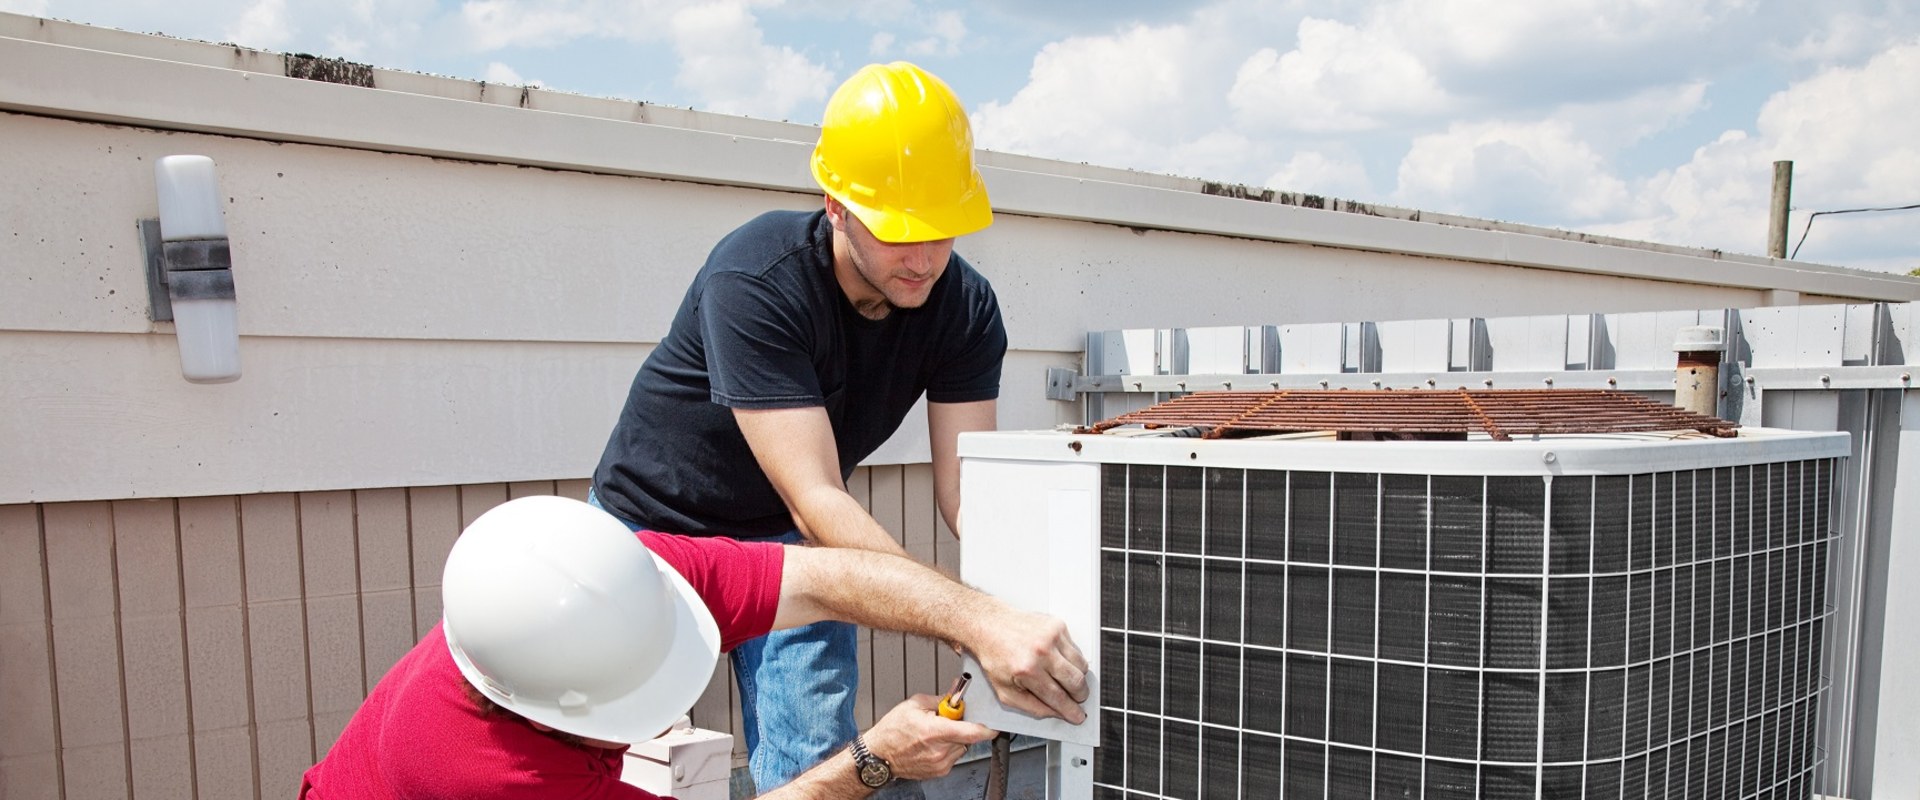 Should hvac be serviced yearly?